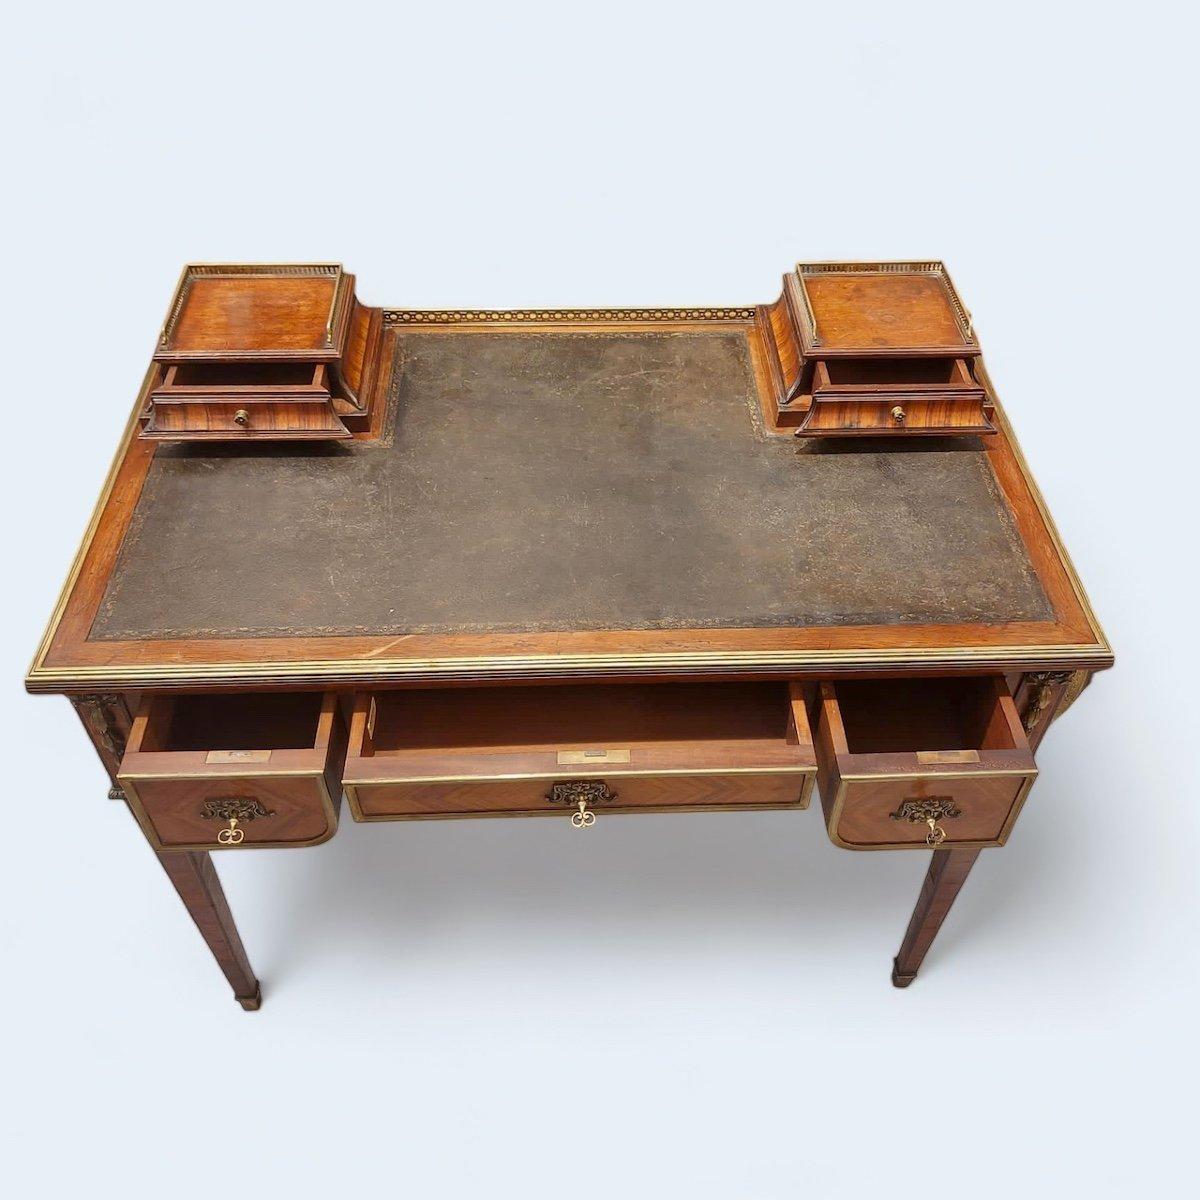 This elegant small desk is a creation of the esteemed Maison Mercier Frères of the renowned Faubourg St Antoine of Paris, with a legacy dating back to its establishment in 1828.

The plaque of the Maison Mercier Frères adorns the underside of the